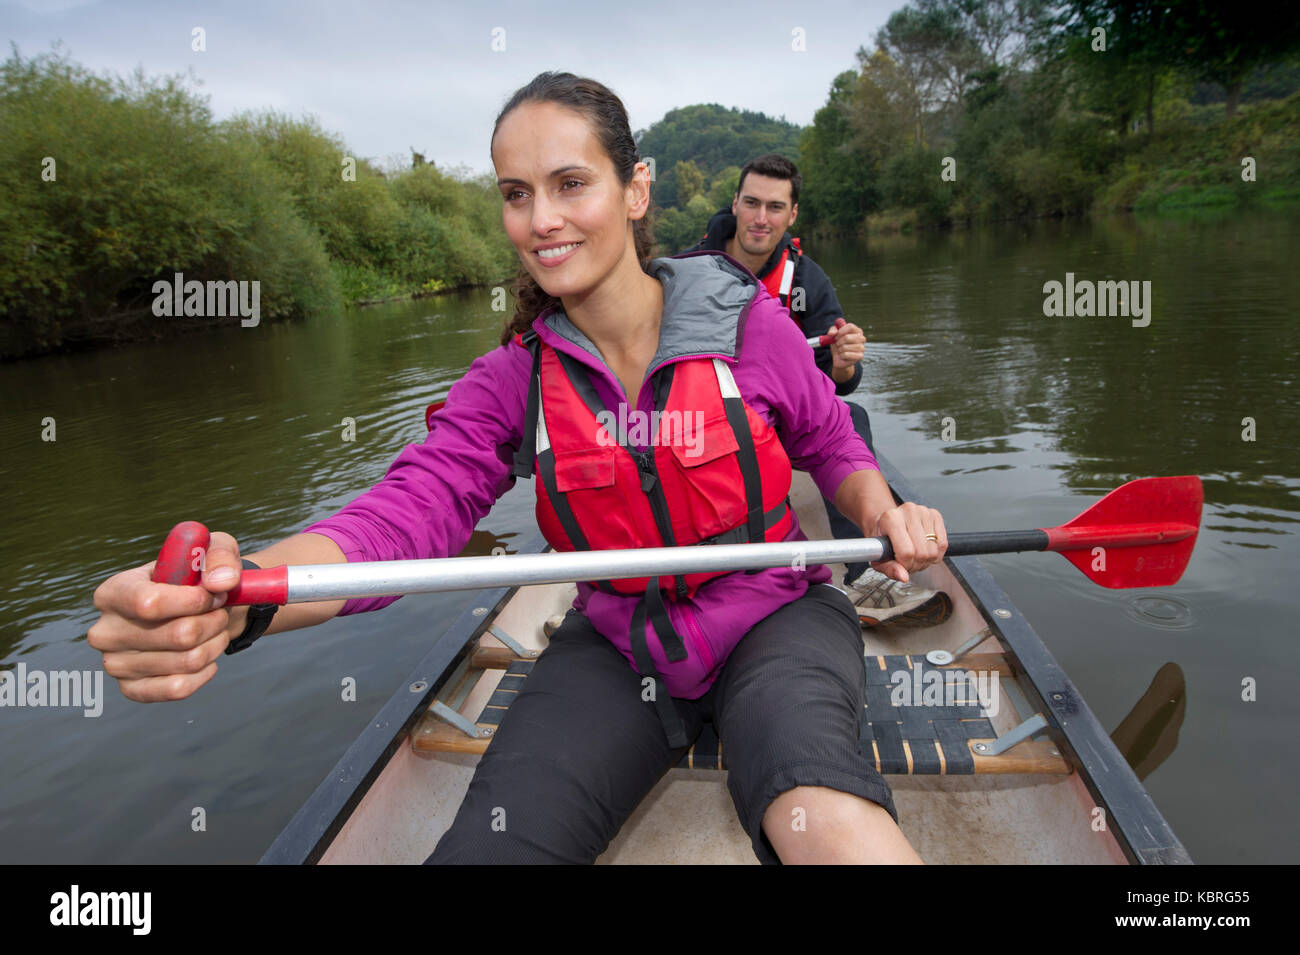 Broadcaster, model, anthropologist Mary-Ann Ochota canoing with her husband Joe Craig on the River Severn with their dog 'Harpo'. Stock Photo